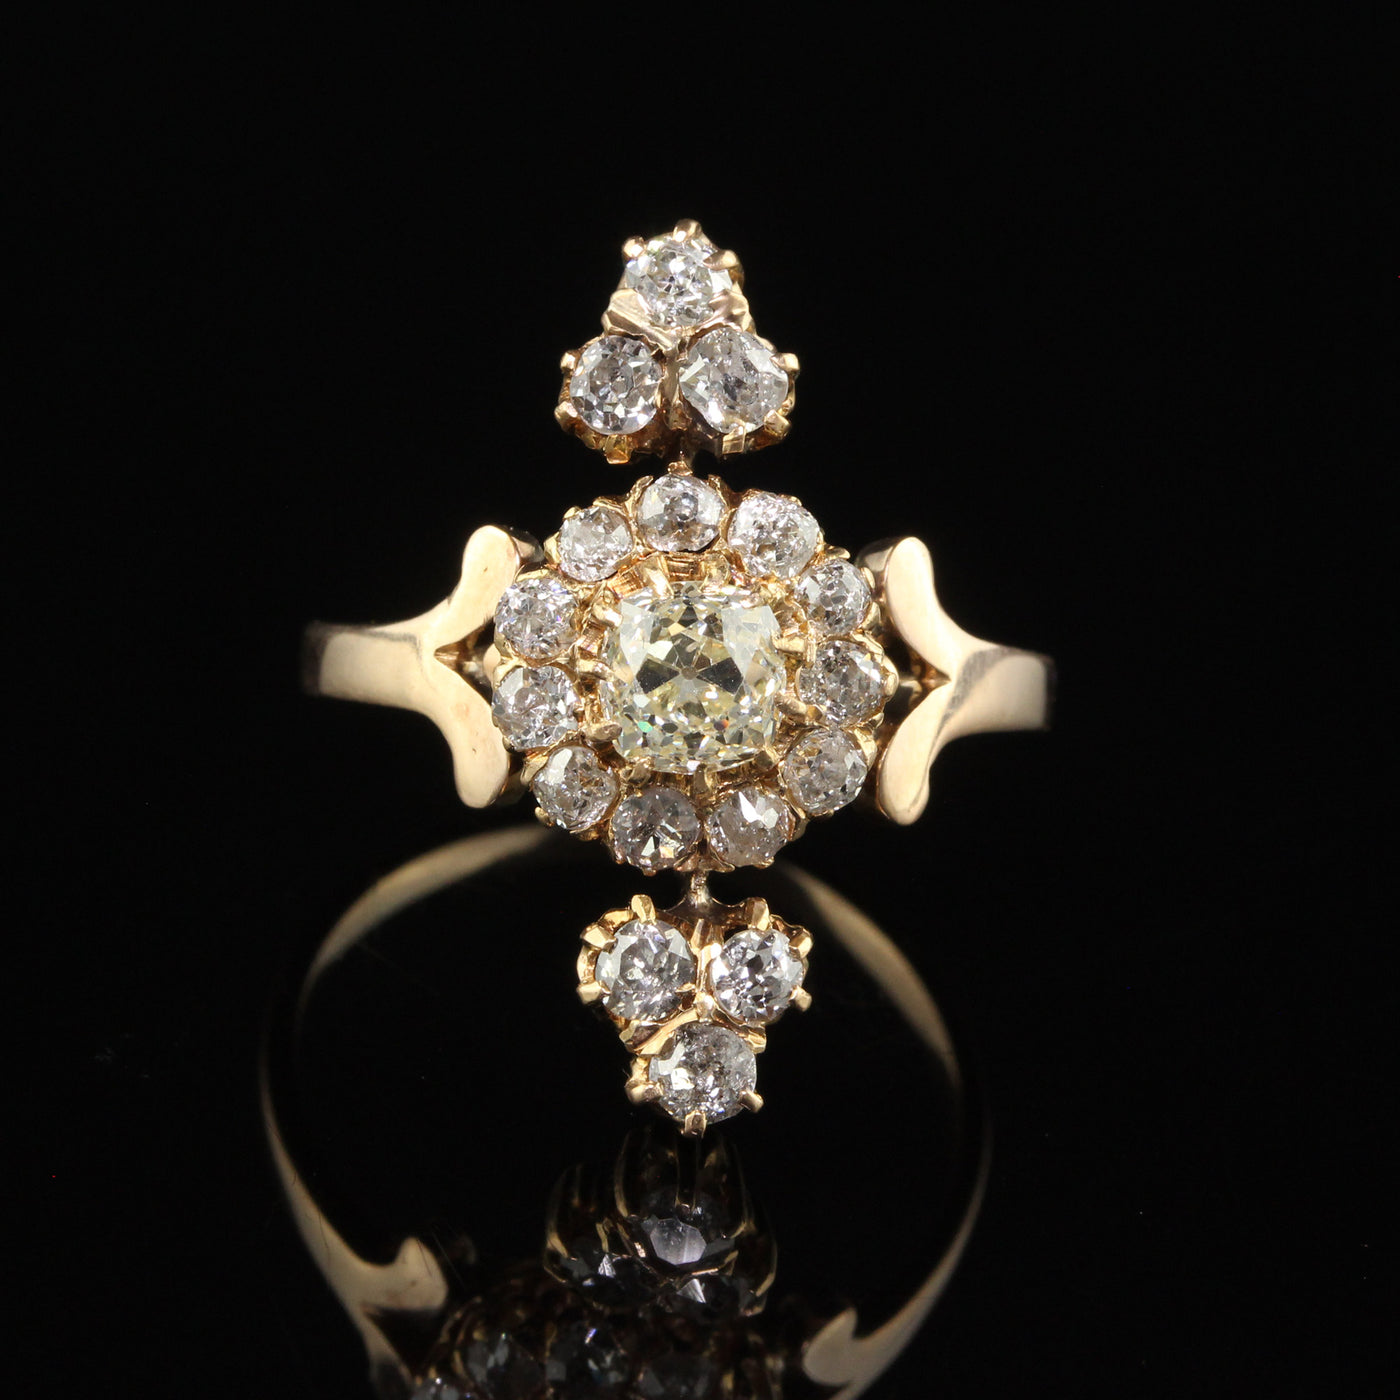 Antique Victorian 18K Yellow Gold Old Mine Cut Diamond Cluster Cocktail Ring